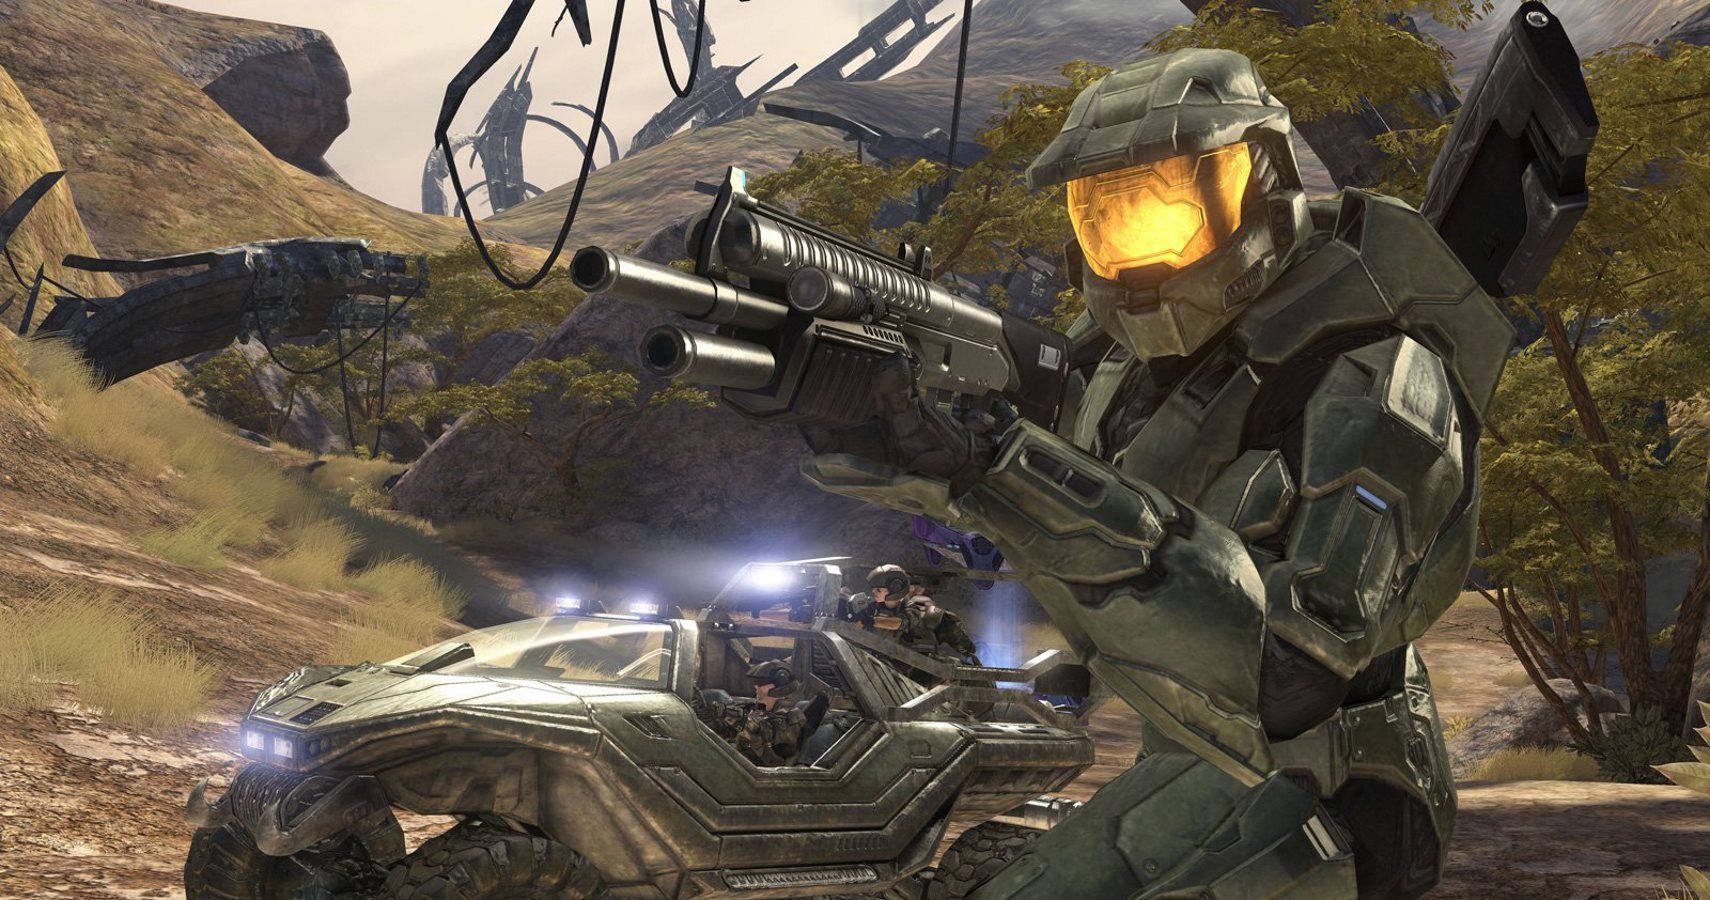 Rumor: Halo: The Master Chief Collection Expected To Launch Around E3